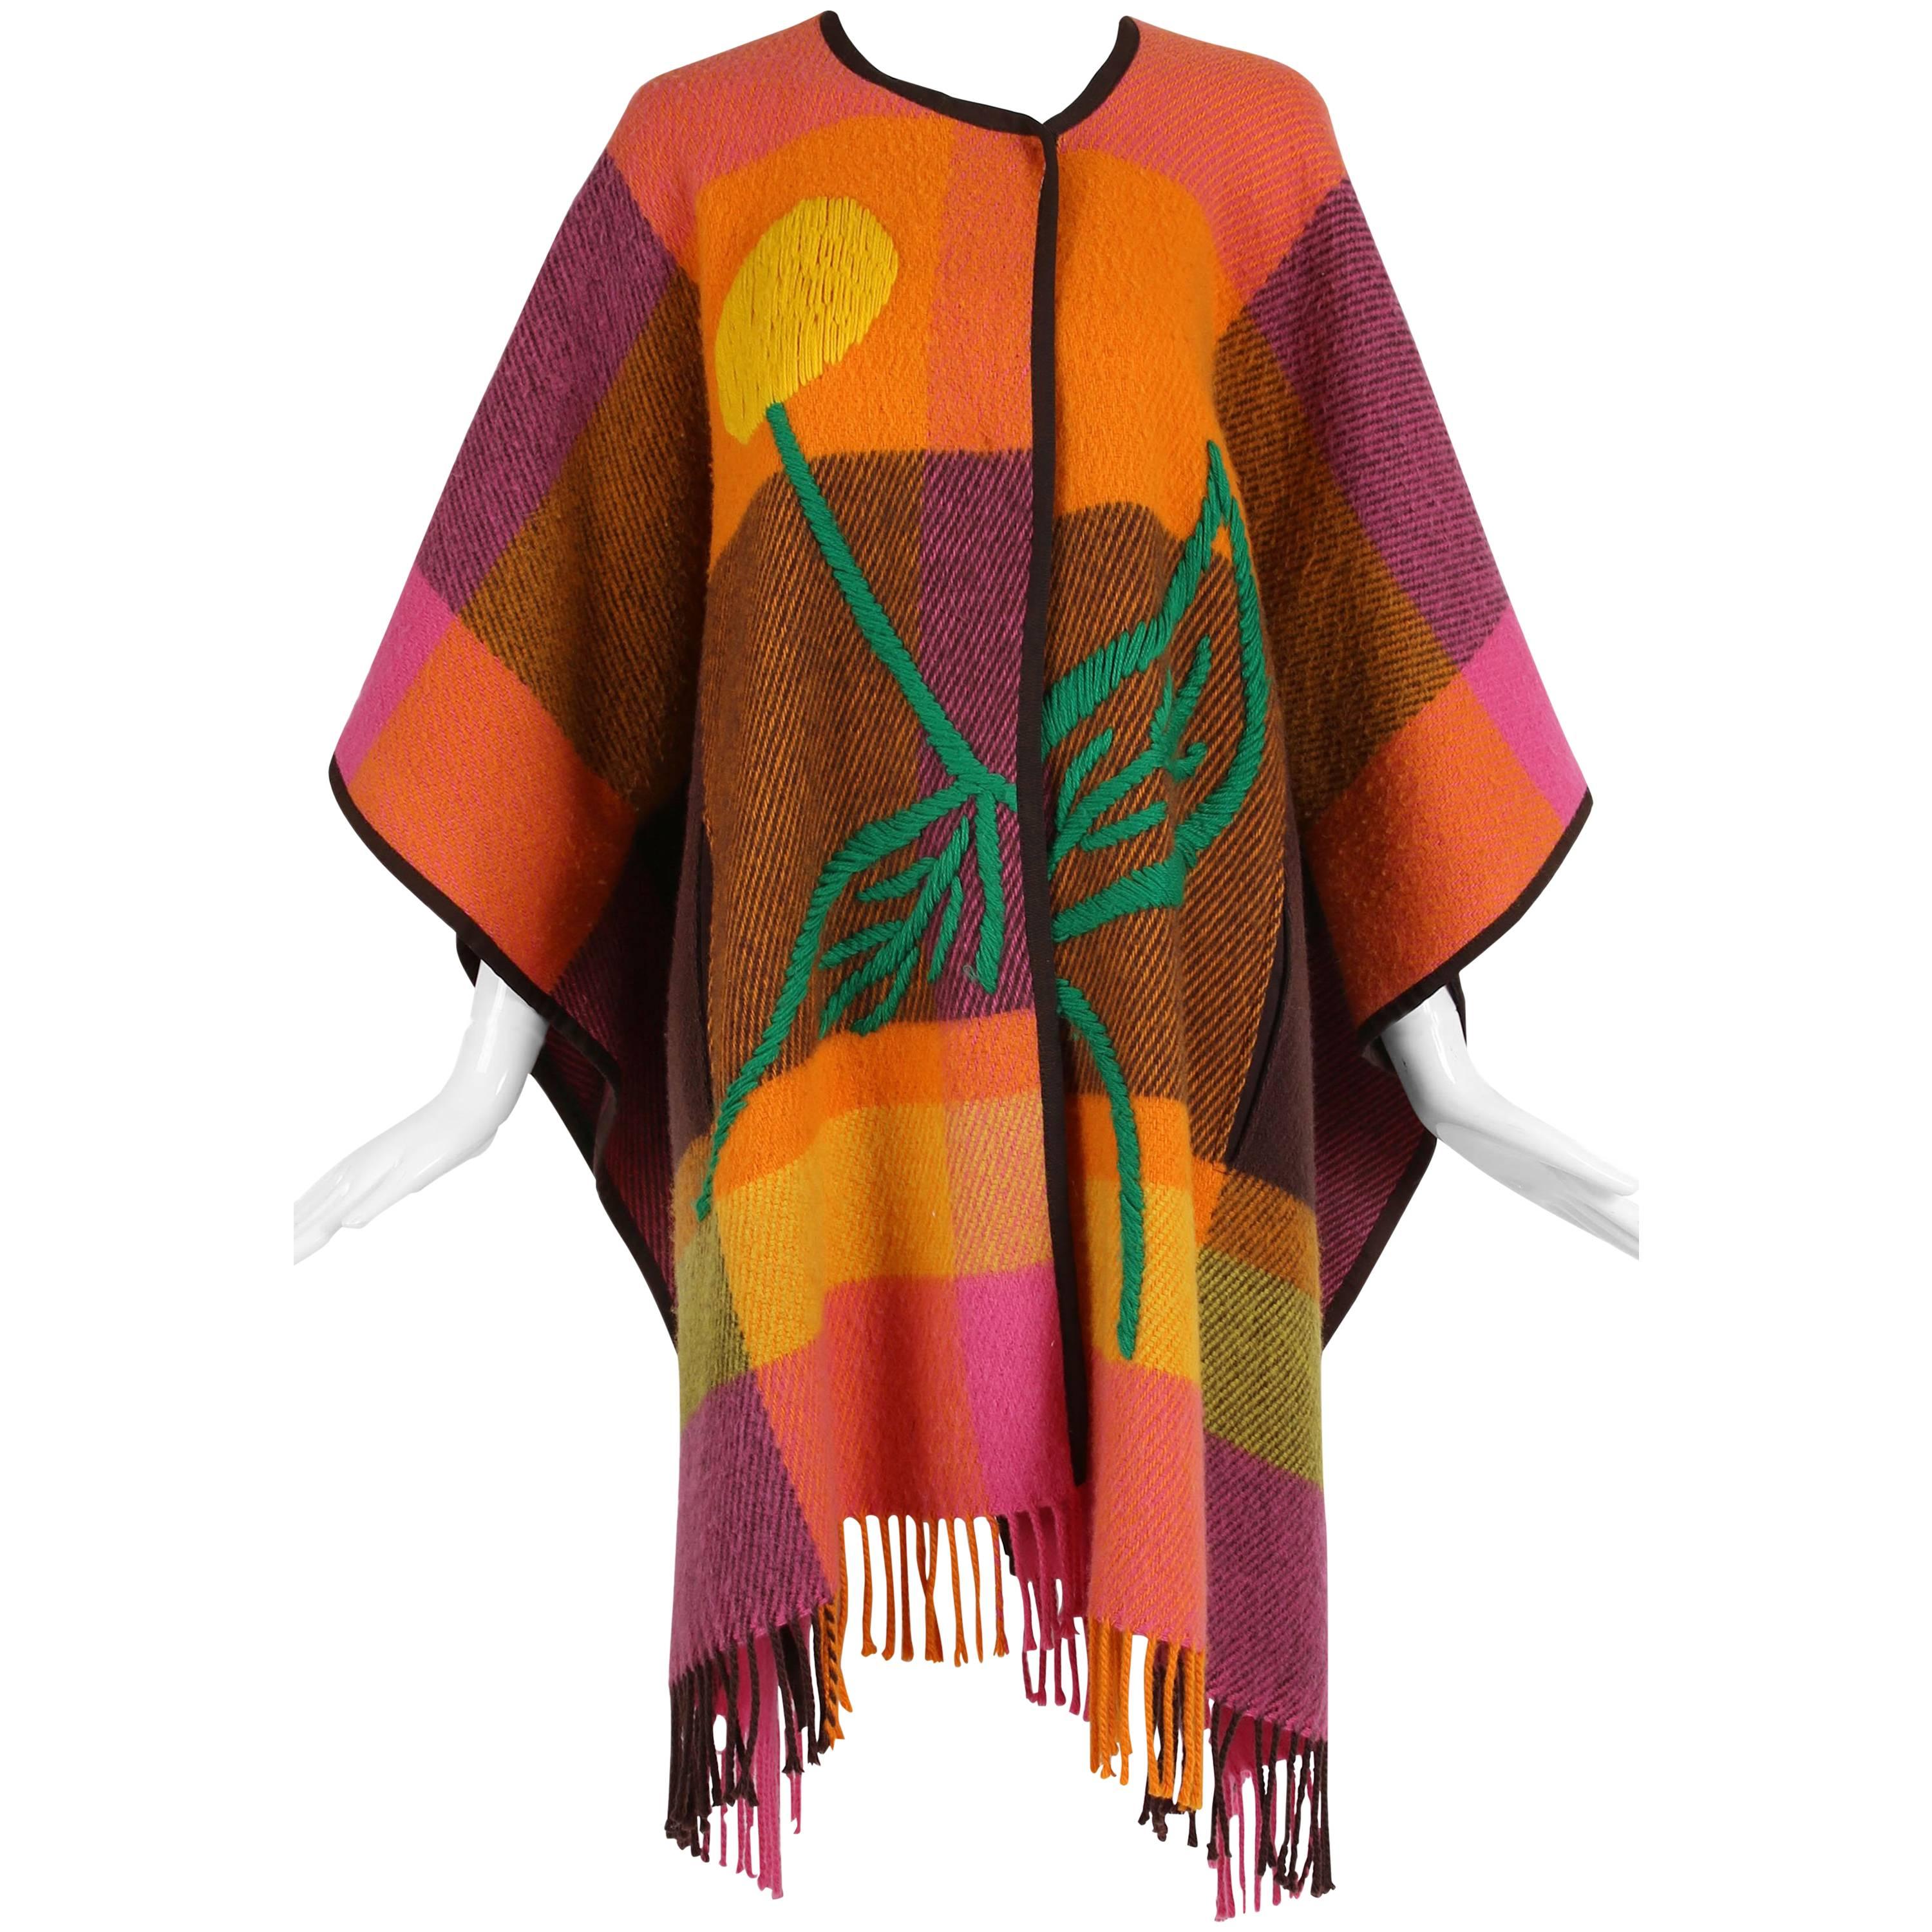 JC de Castelbajac Plaid Wool Poncho with Oversized Embroidered Flower Design